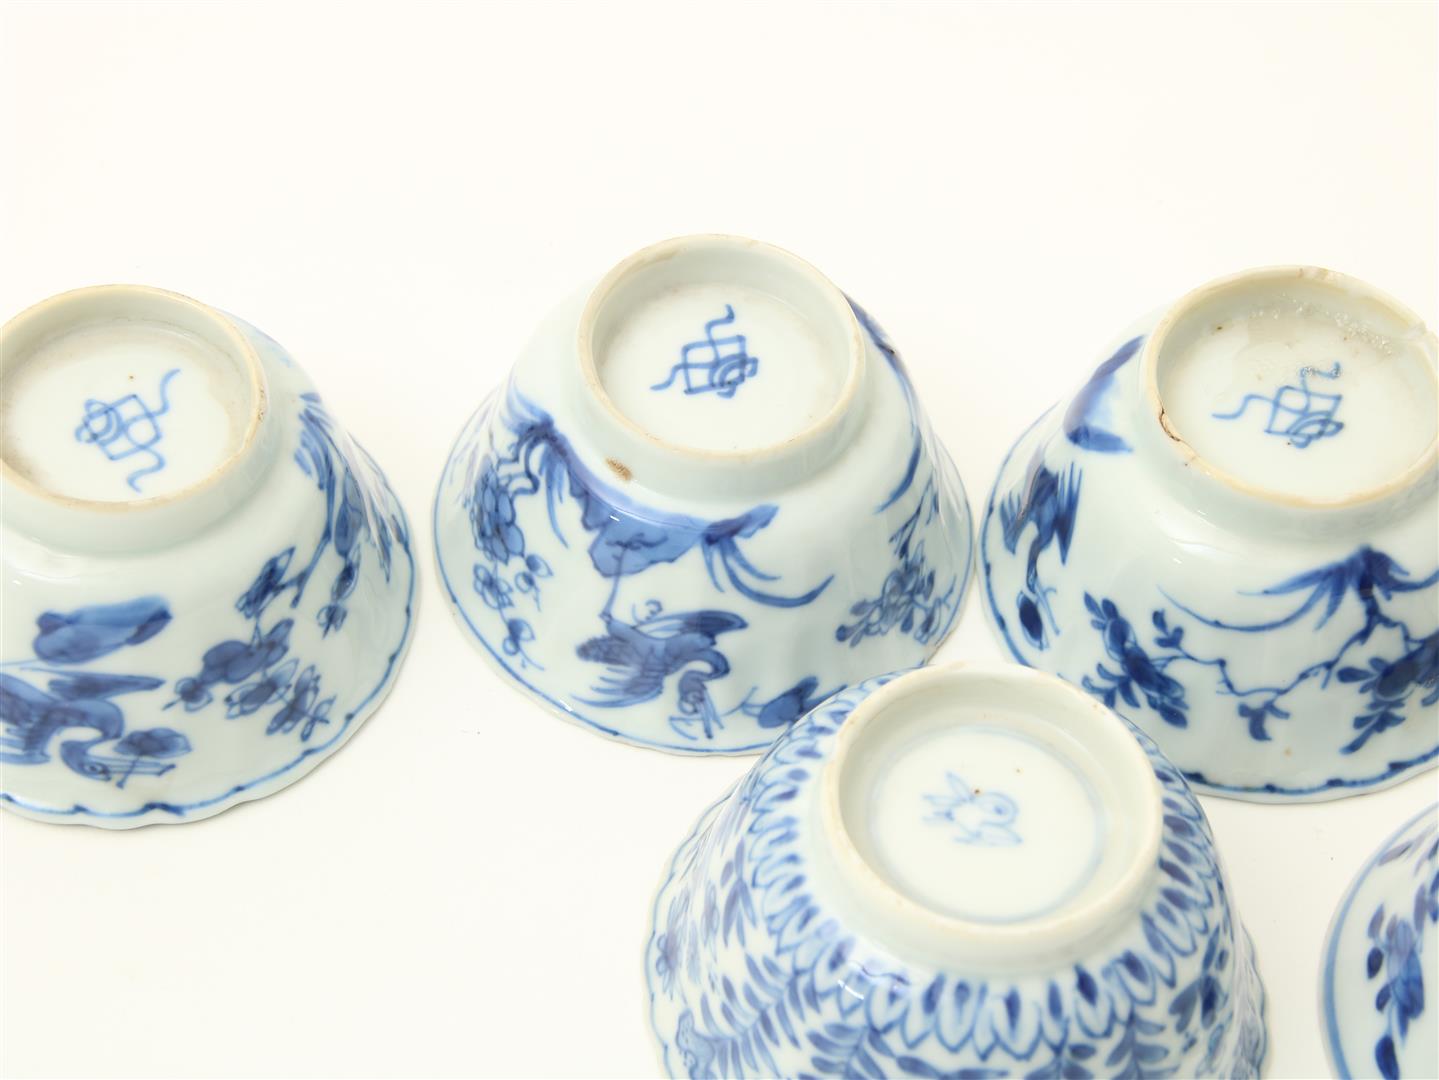 Series of 3 porcelain Kangxi cups with flower decoration and marked with Lozenge mark, including 5 - Image 5 of 6